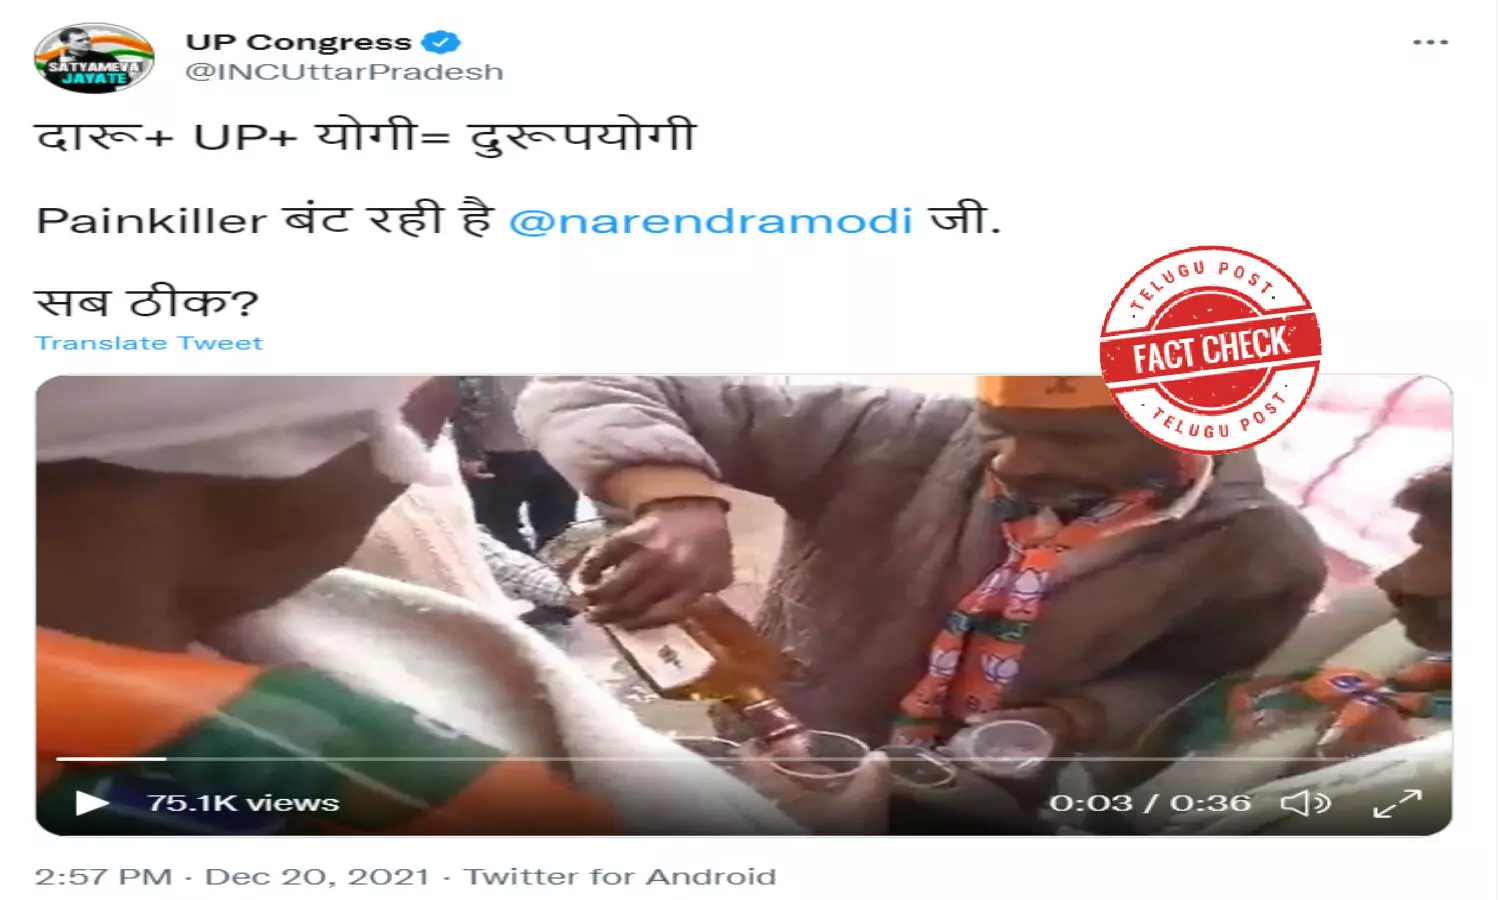 Old video shared with claim that BJP distributed alcohol in recent national meeting held at Hyderabad